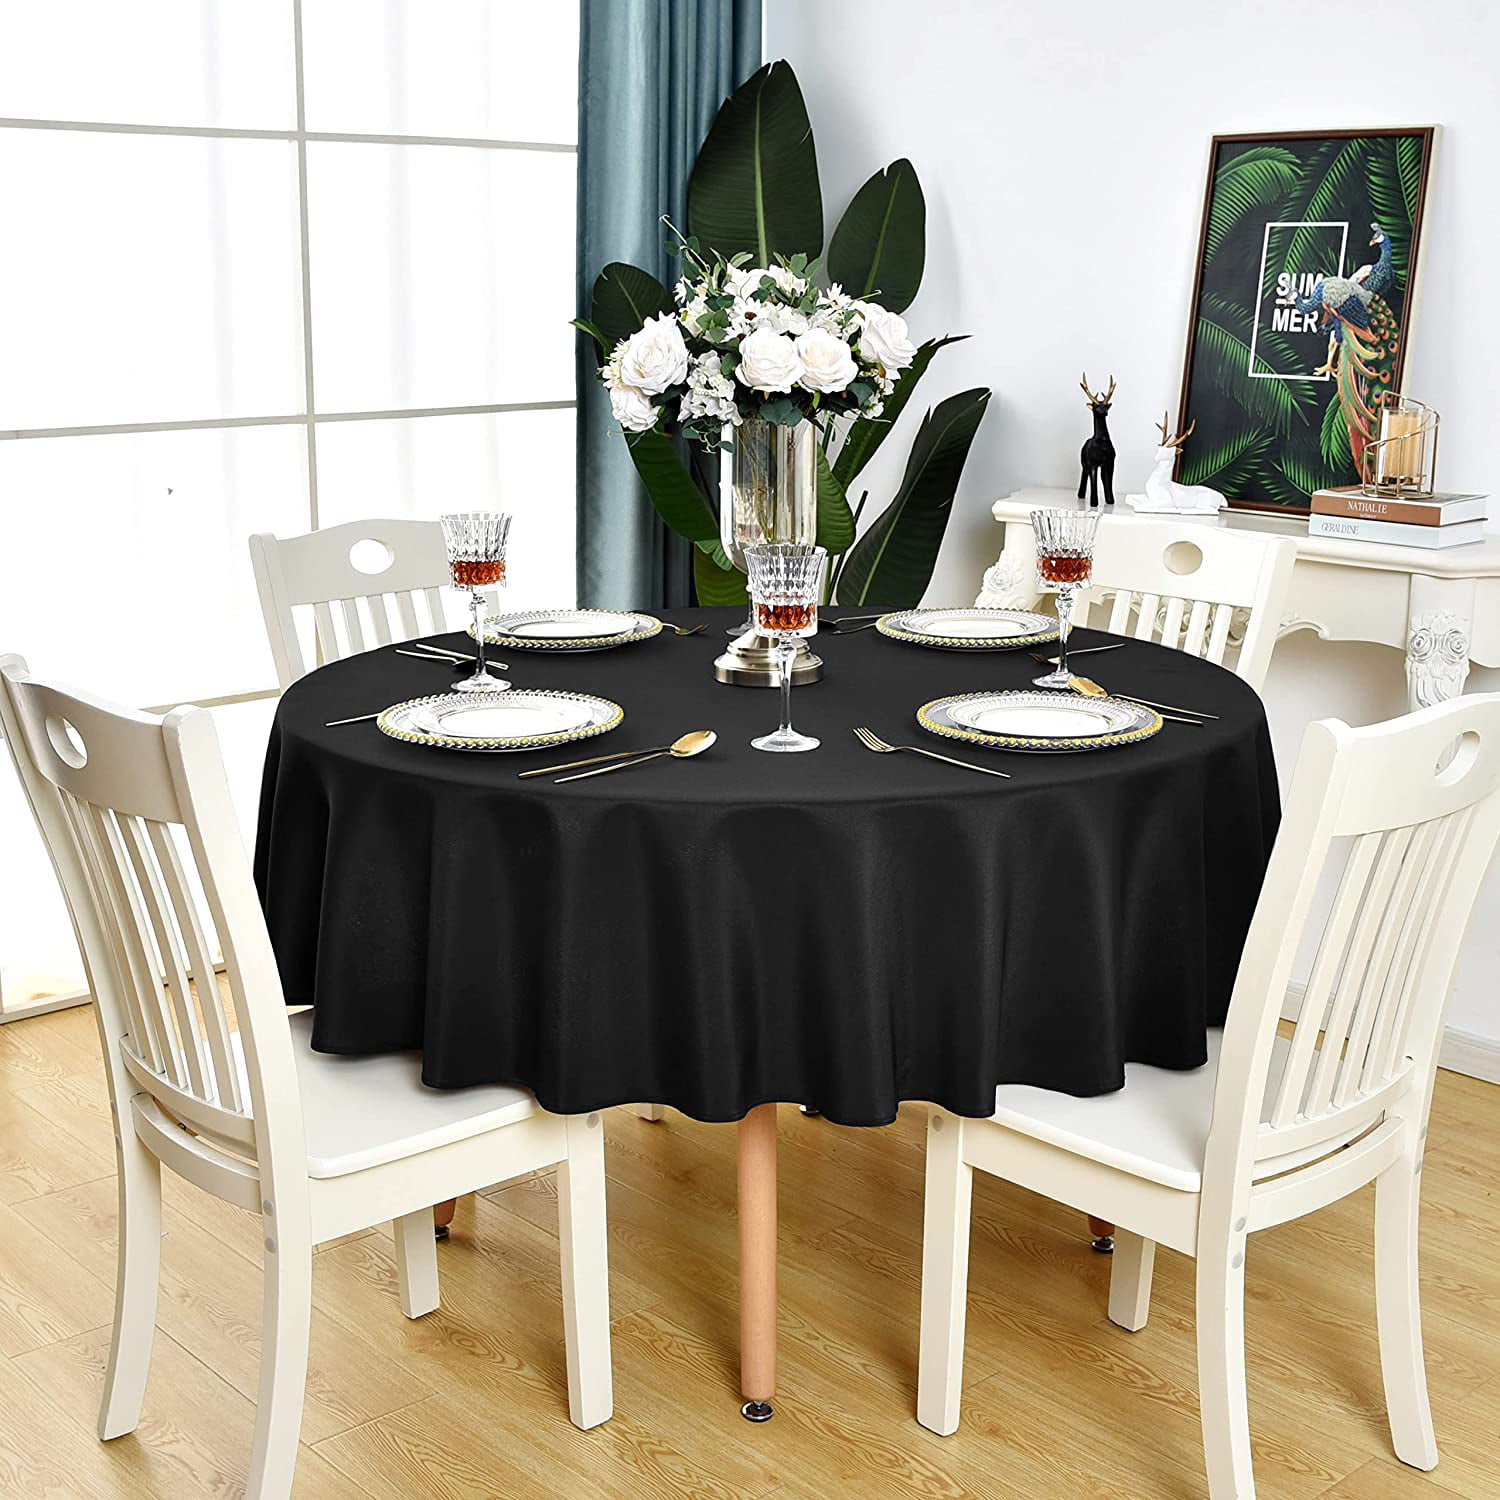 60 inch, Beige Round Tablecloth Waterproof Stain Resistant and Wrinkle Free Table Cloths Washable Polyester Table Cover for Dining Table/Parties/Wedding 